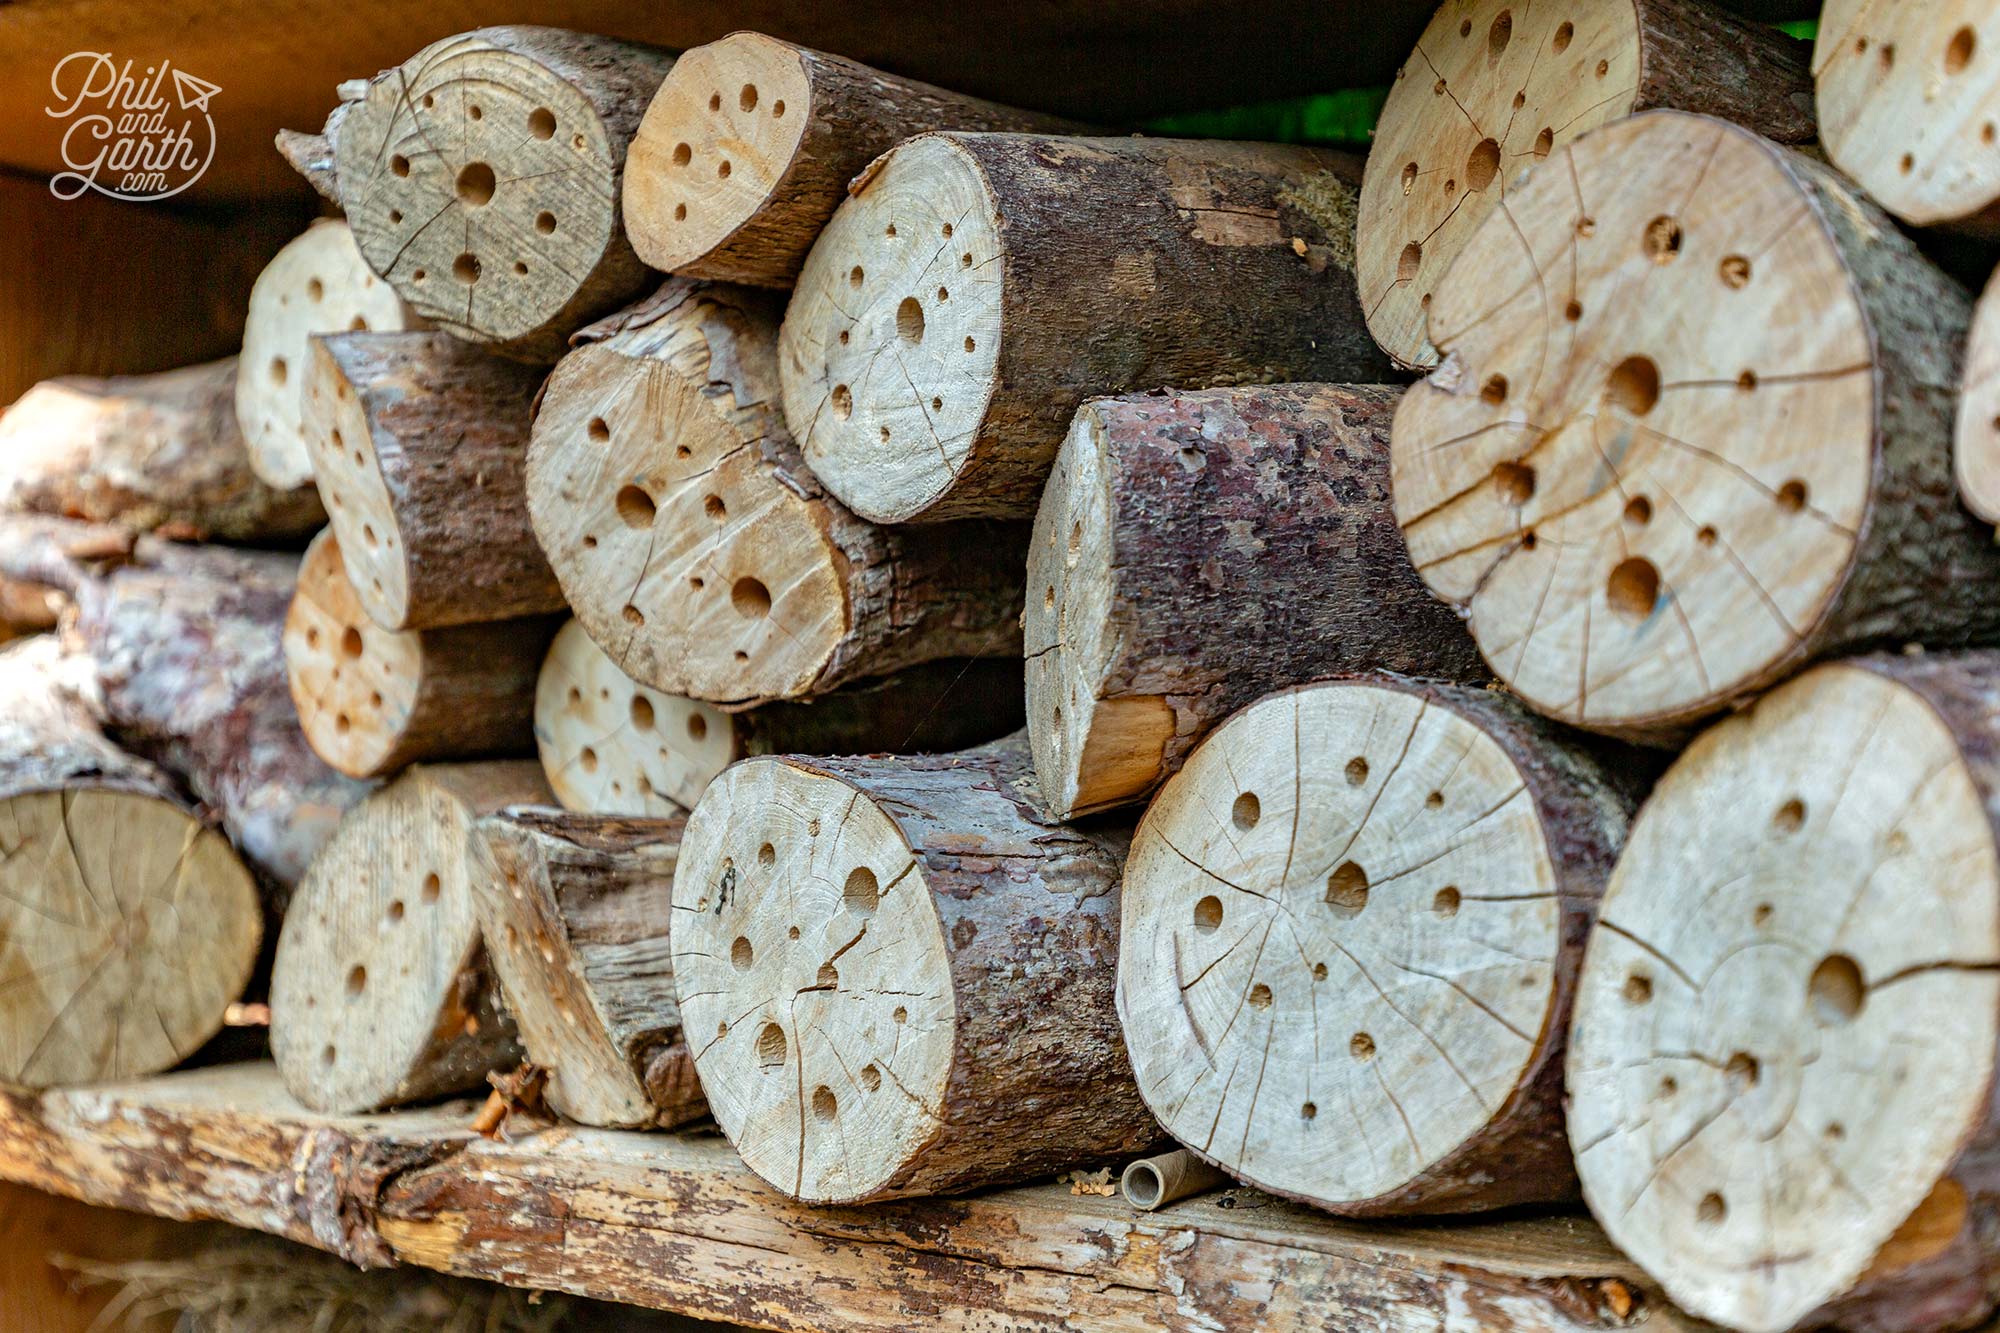 We're going to take home this idea - drilling different size holes in logs for bugs